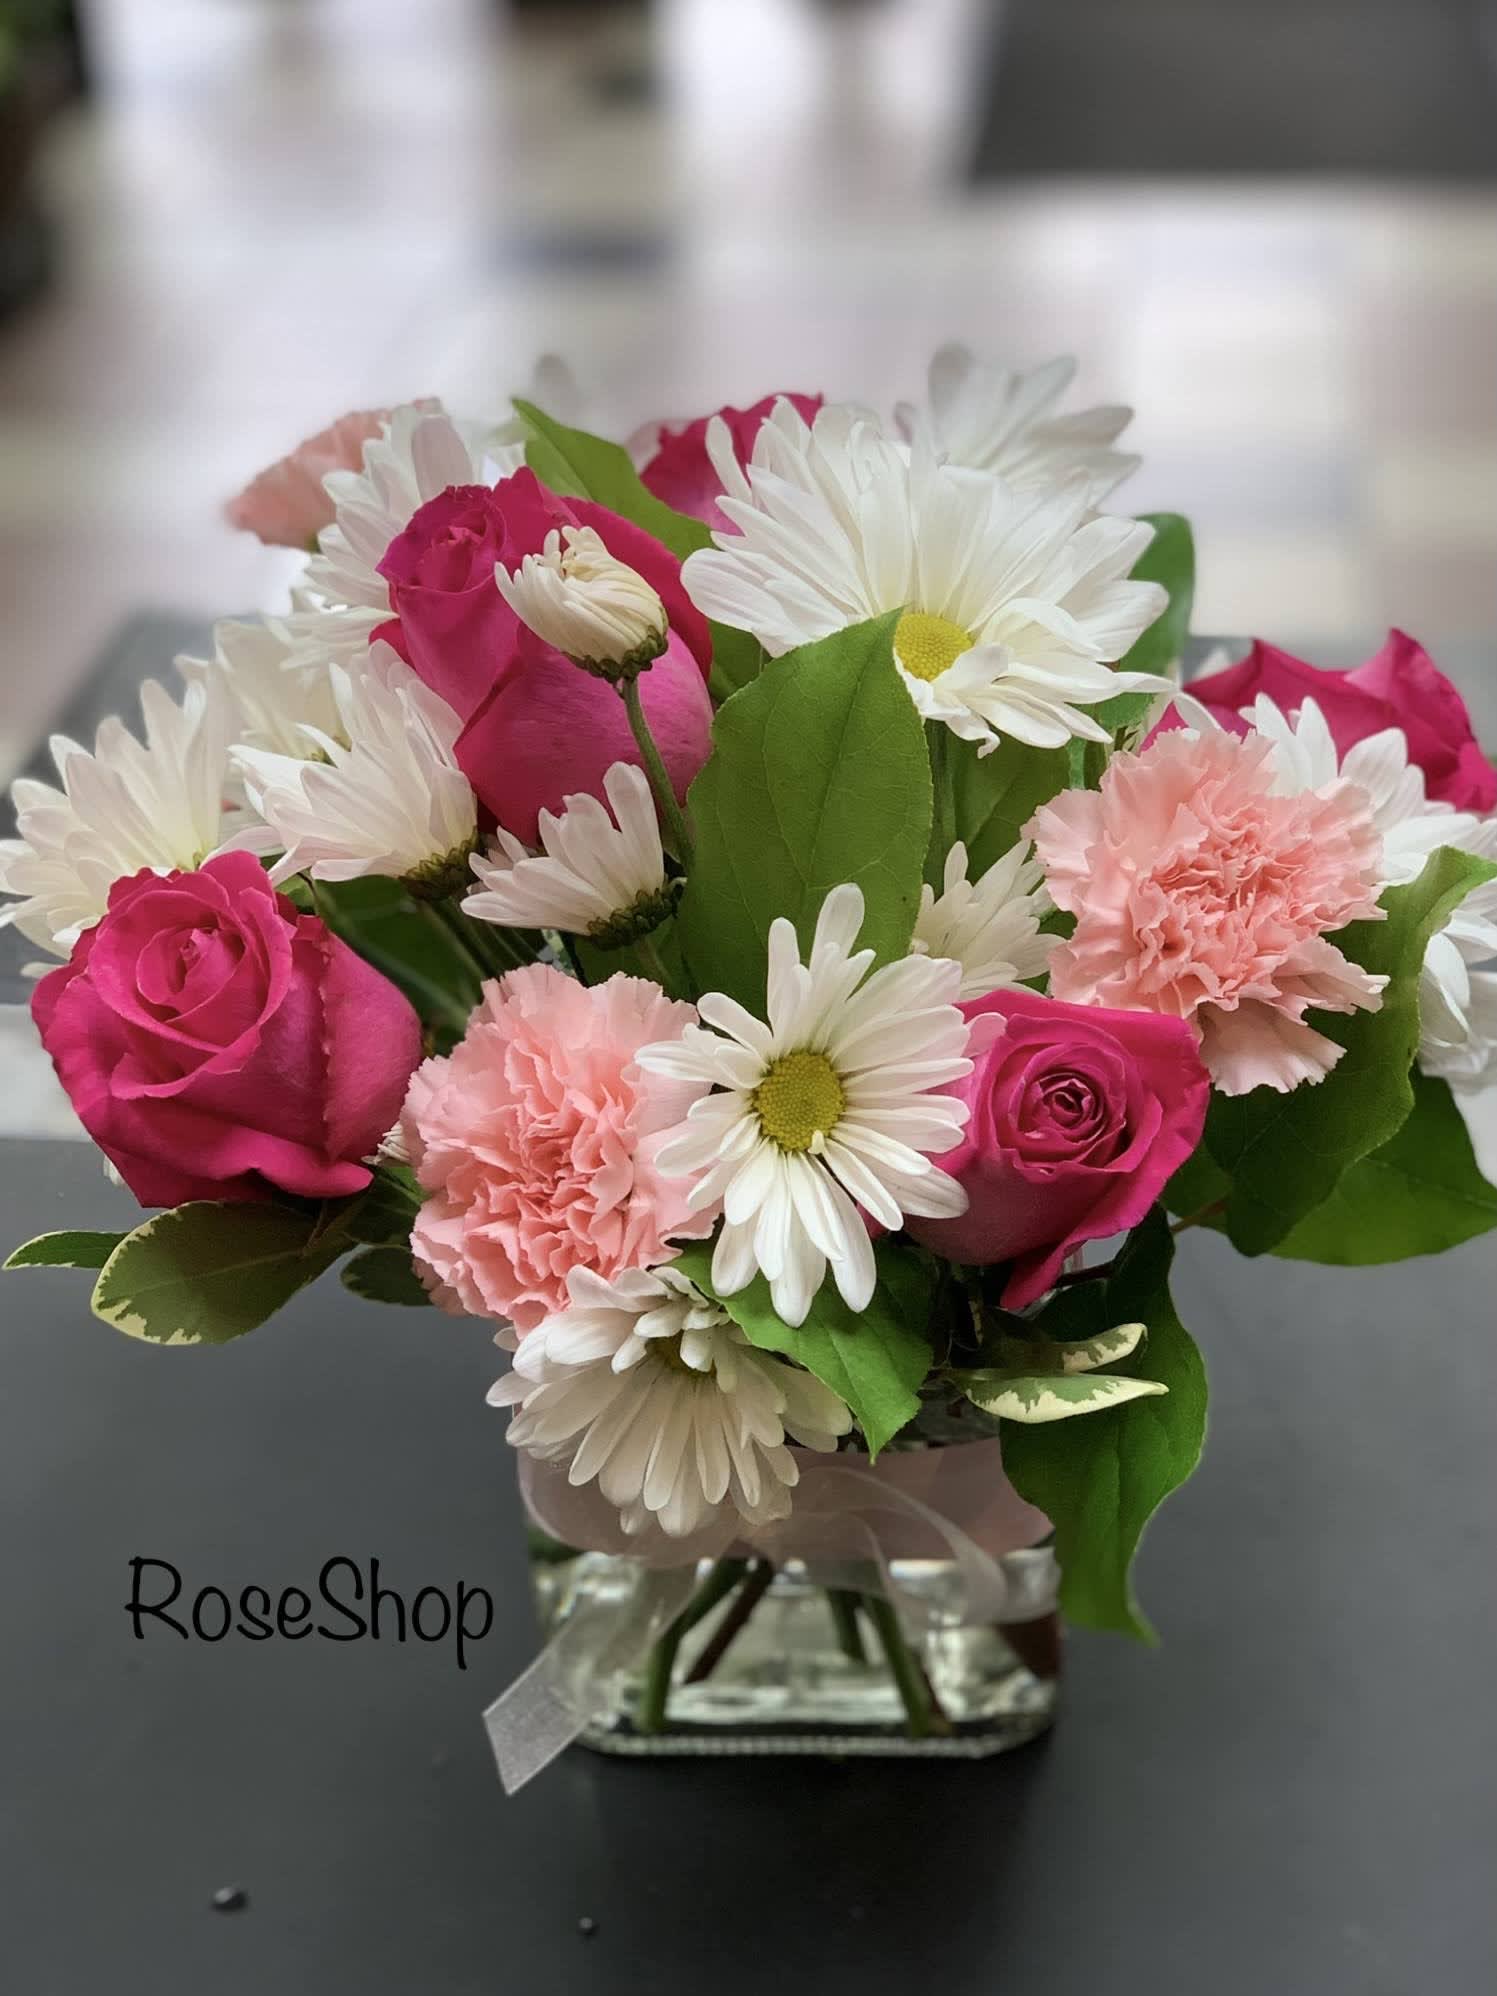 Sweet love - Show your love and admiration for that special person in your life with this beautiful arrangement. 